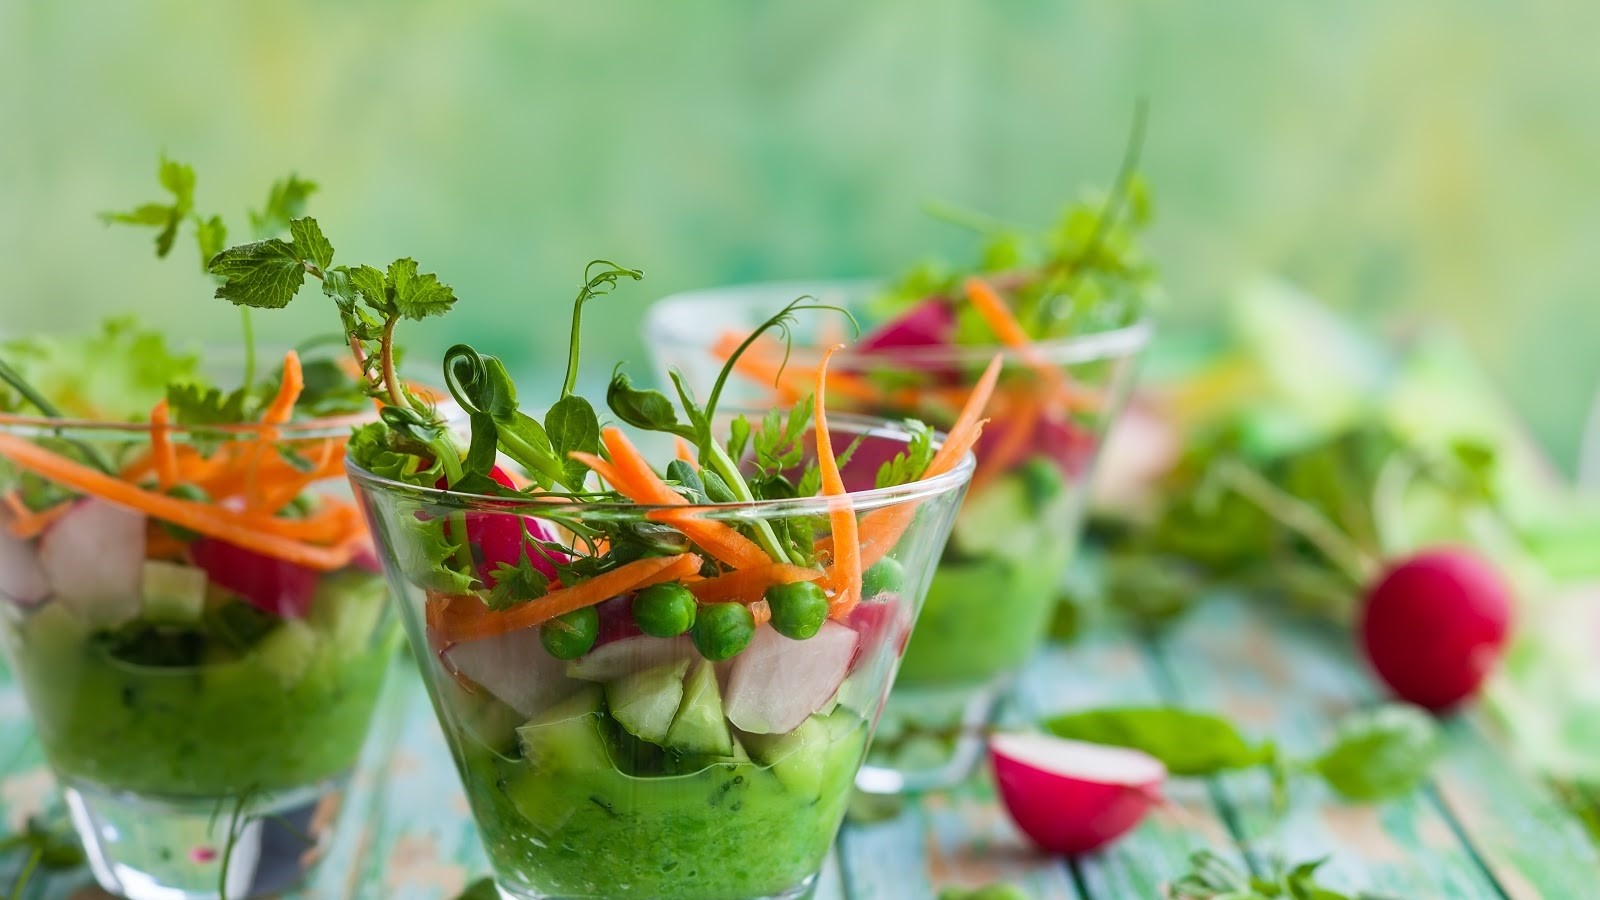 Have You Ever Wanted To Try The Raw Food Diet?